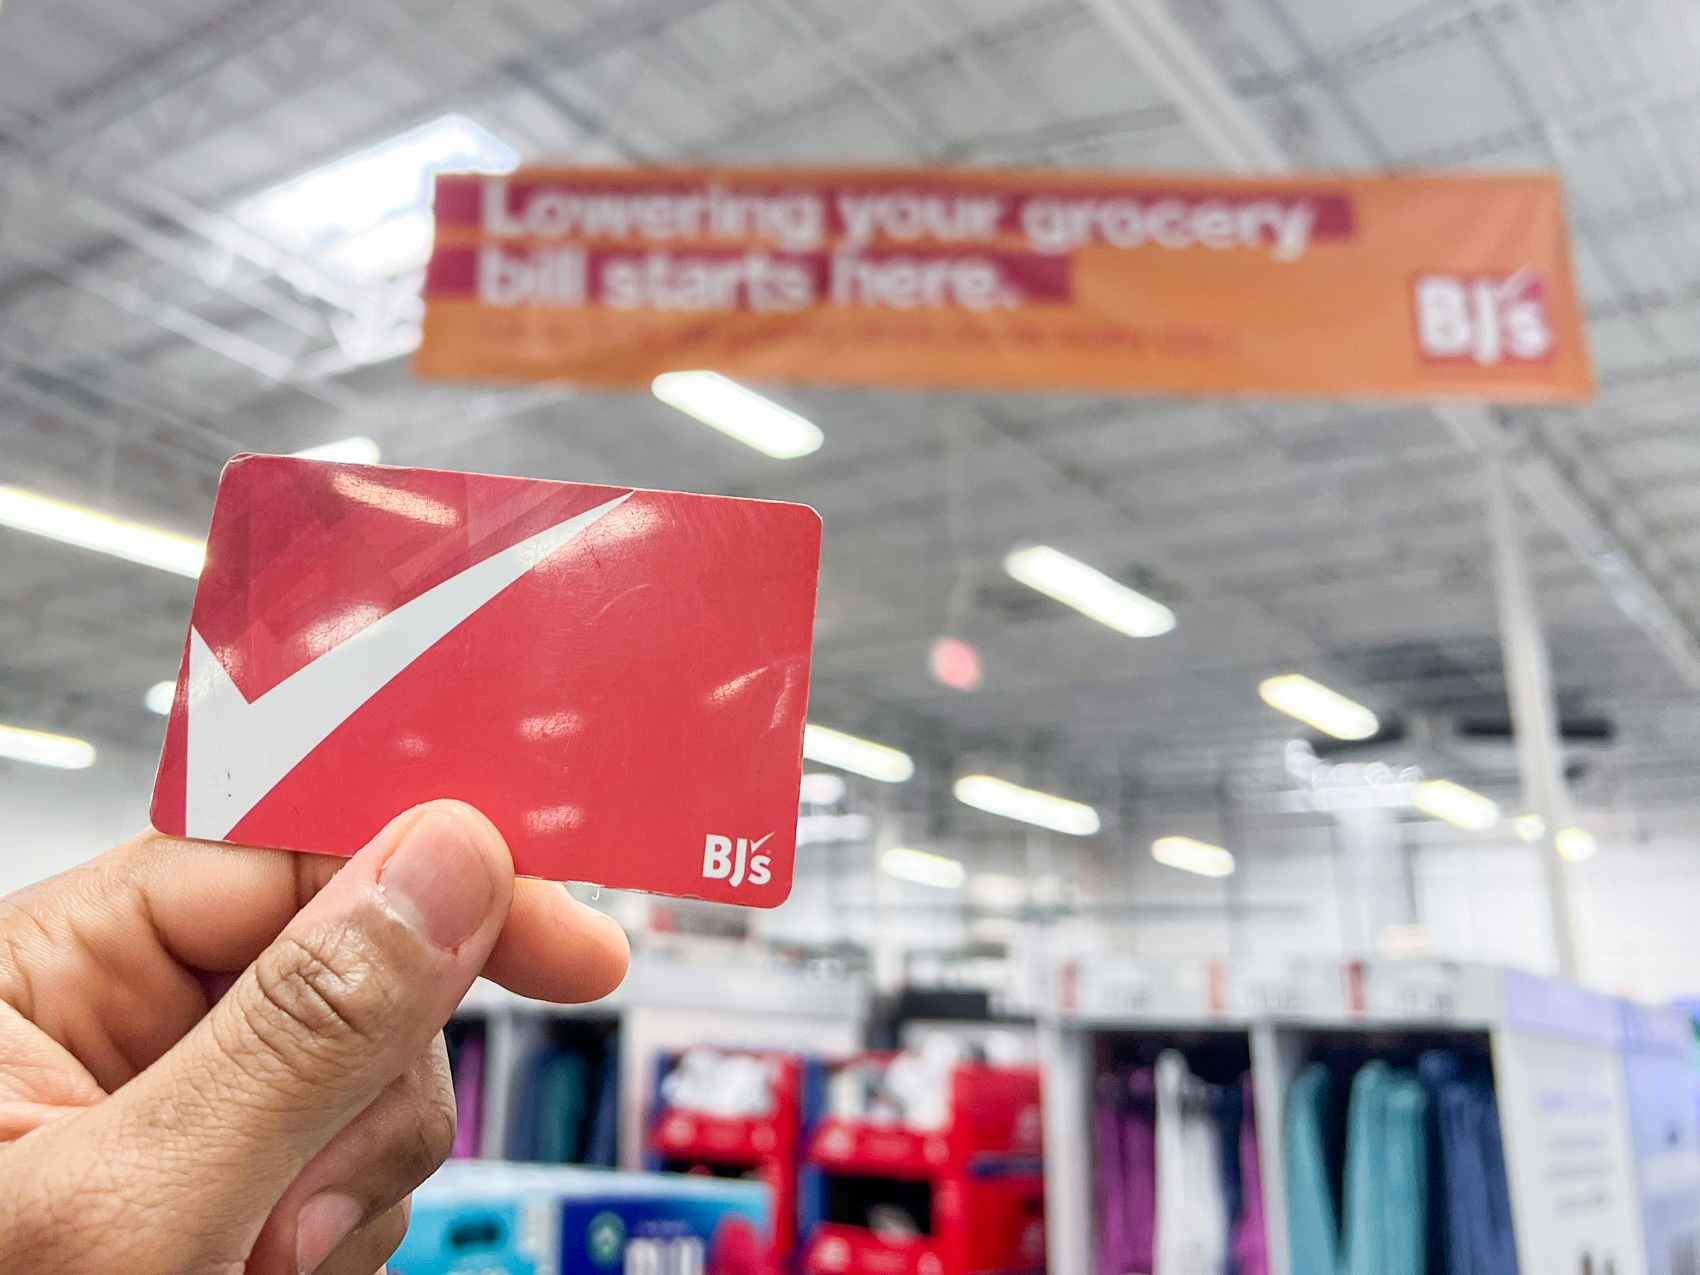 Person holding a Bj's Membership card inside a Bj's Warehouse